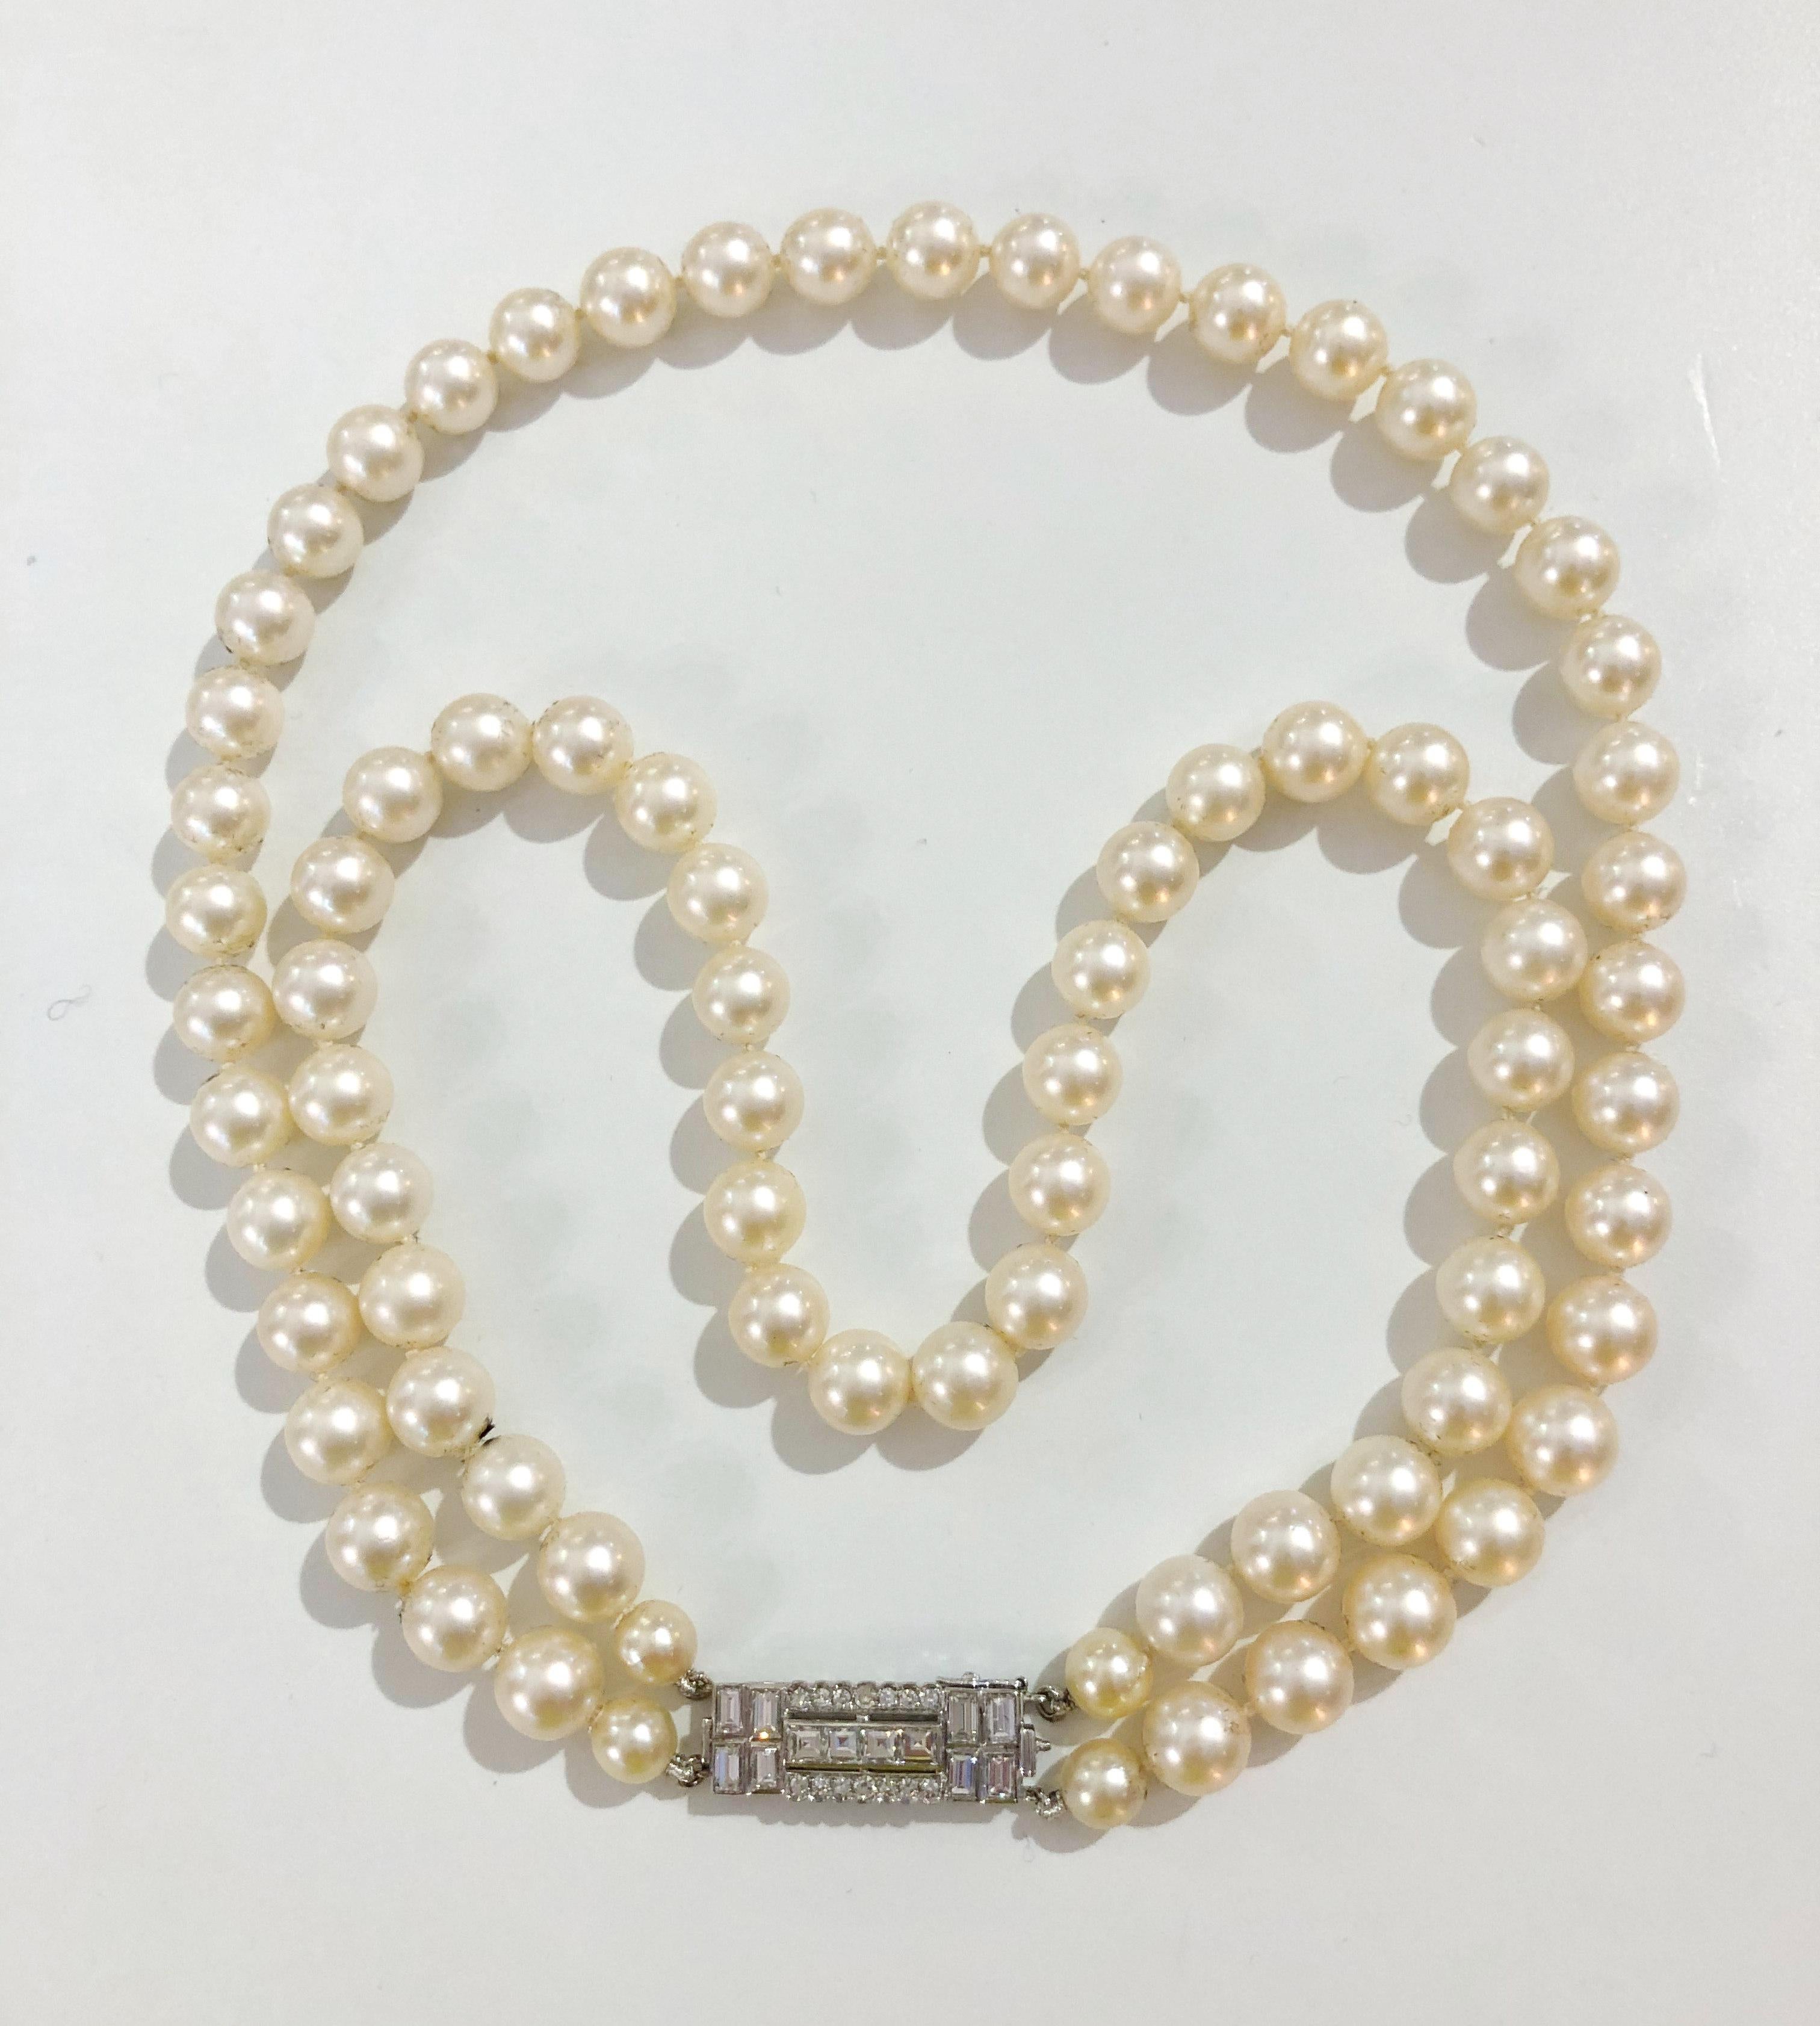 Vintage necklace with double strands of 9mm pearls, and the clasp is in brilliant diamonds total of 2.5 karats, Italy 1970s-1980s
Length 45 cm